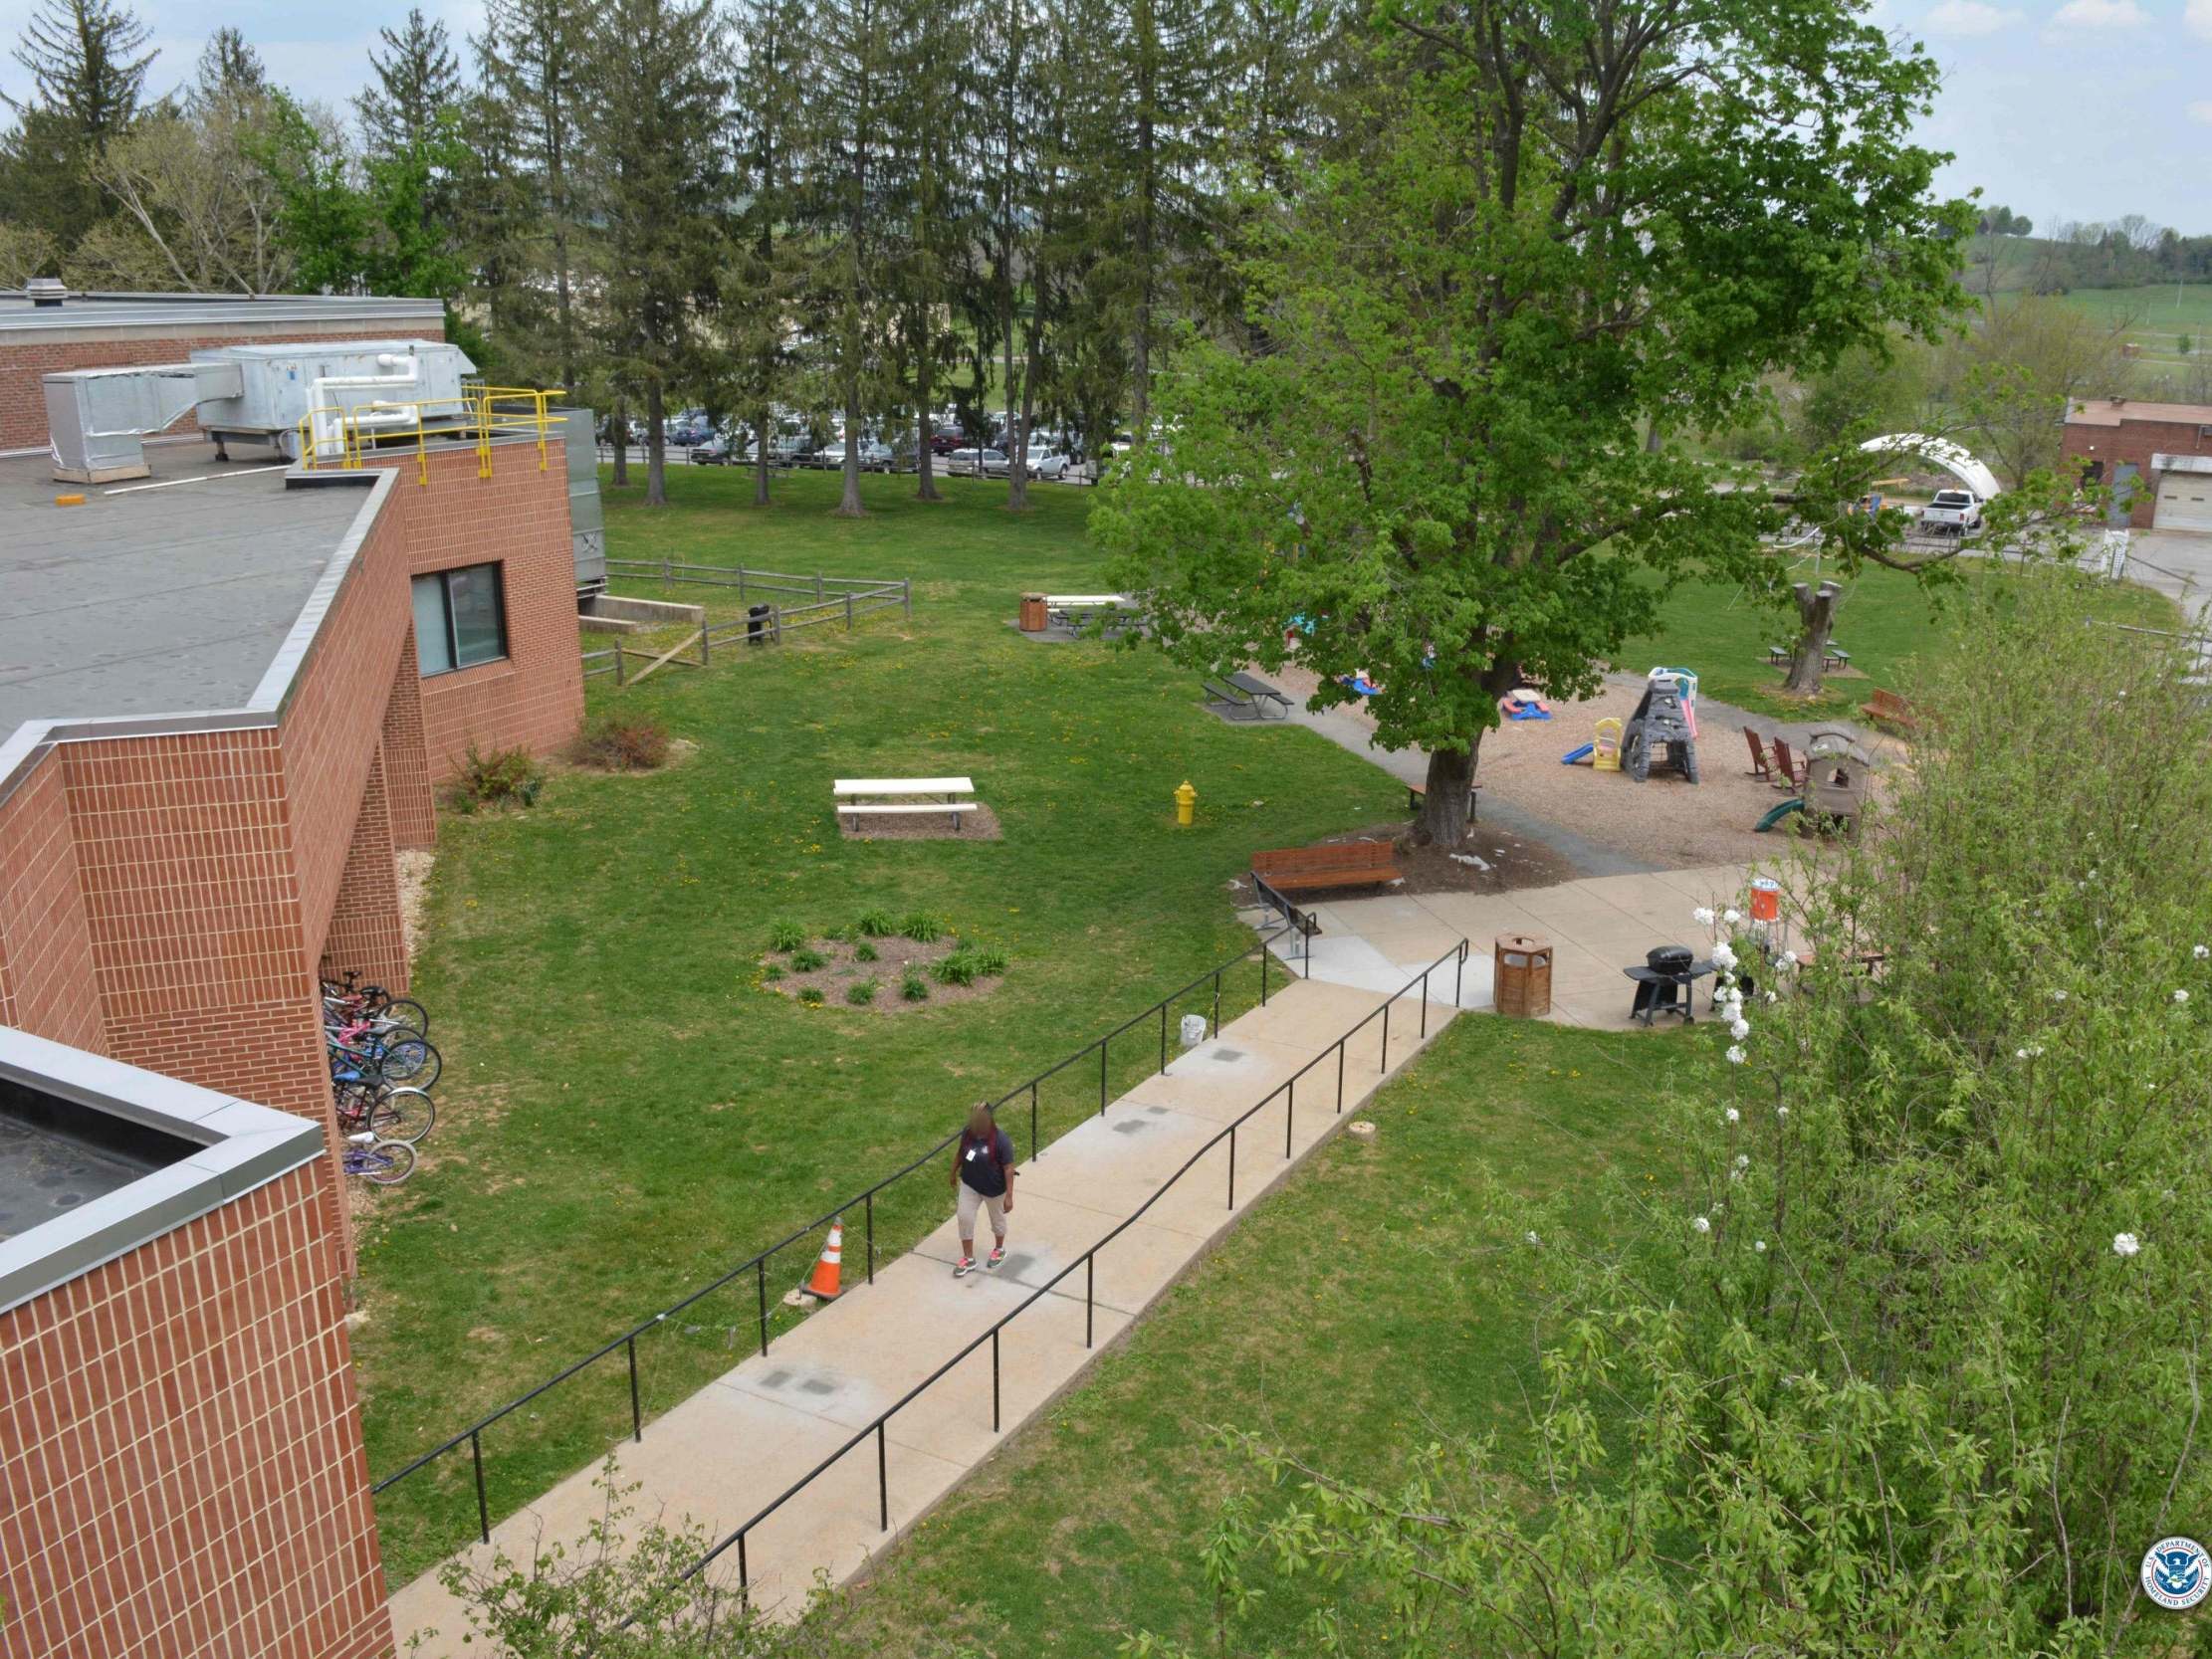 File image released by US Immigration and Customs Enforcement shows the Berks Family Residential Centre in Leesport, Pennsylvania, where the Connors family was detained.